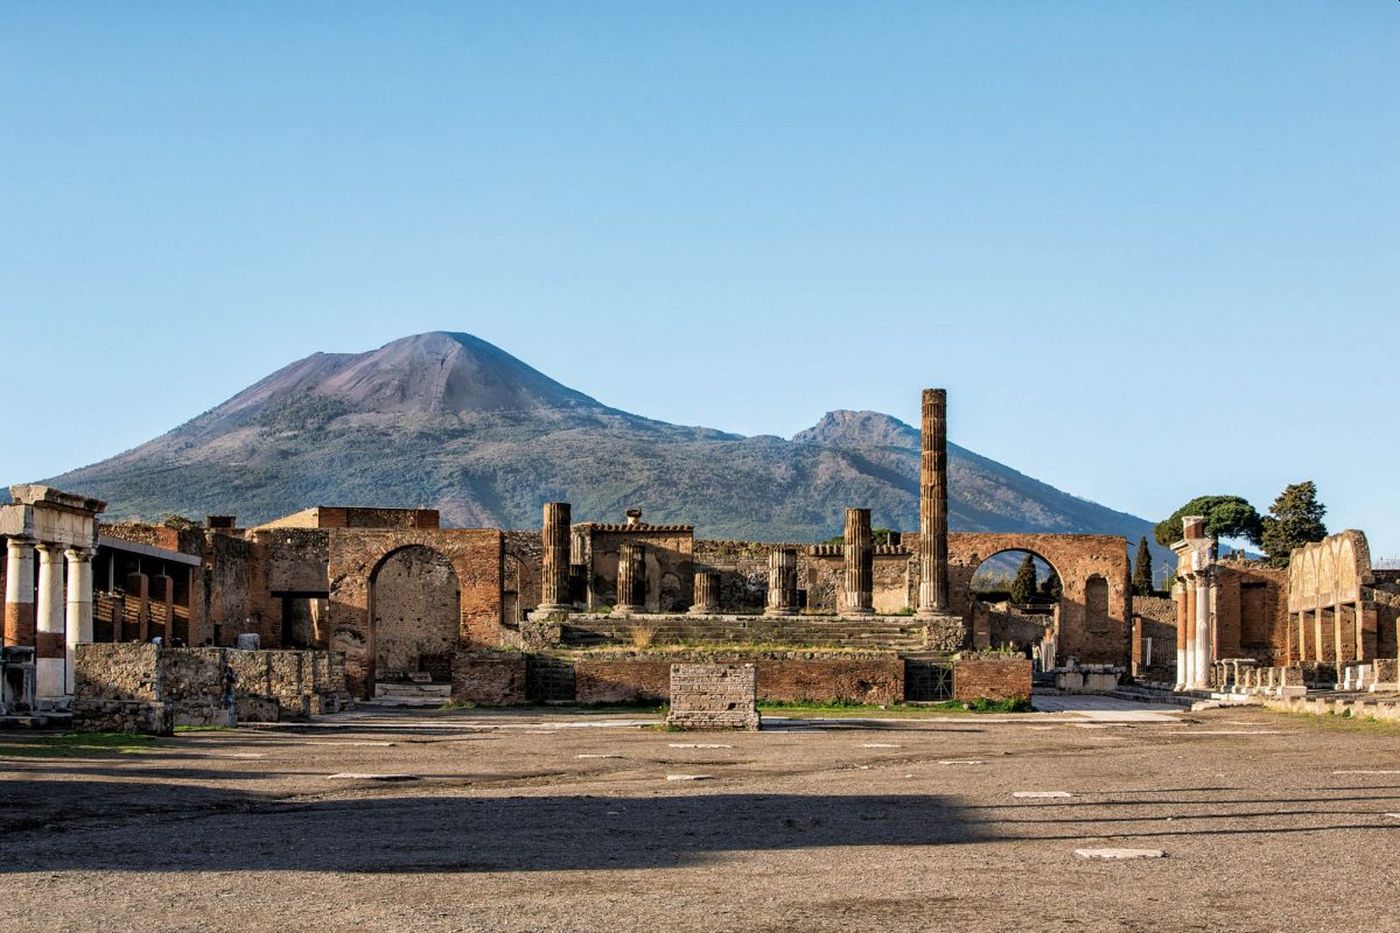 Hellish Demise and Unearthing of the Buried City of Pompeii